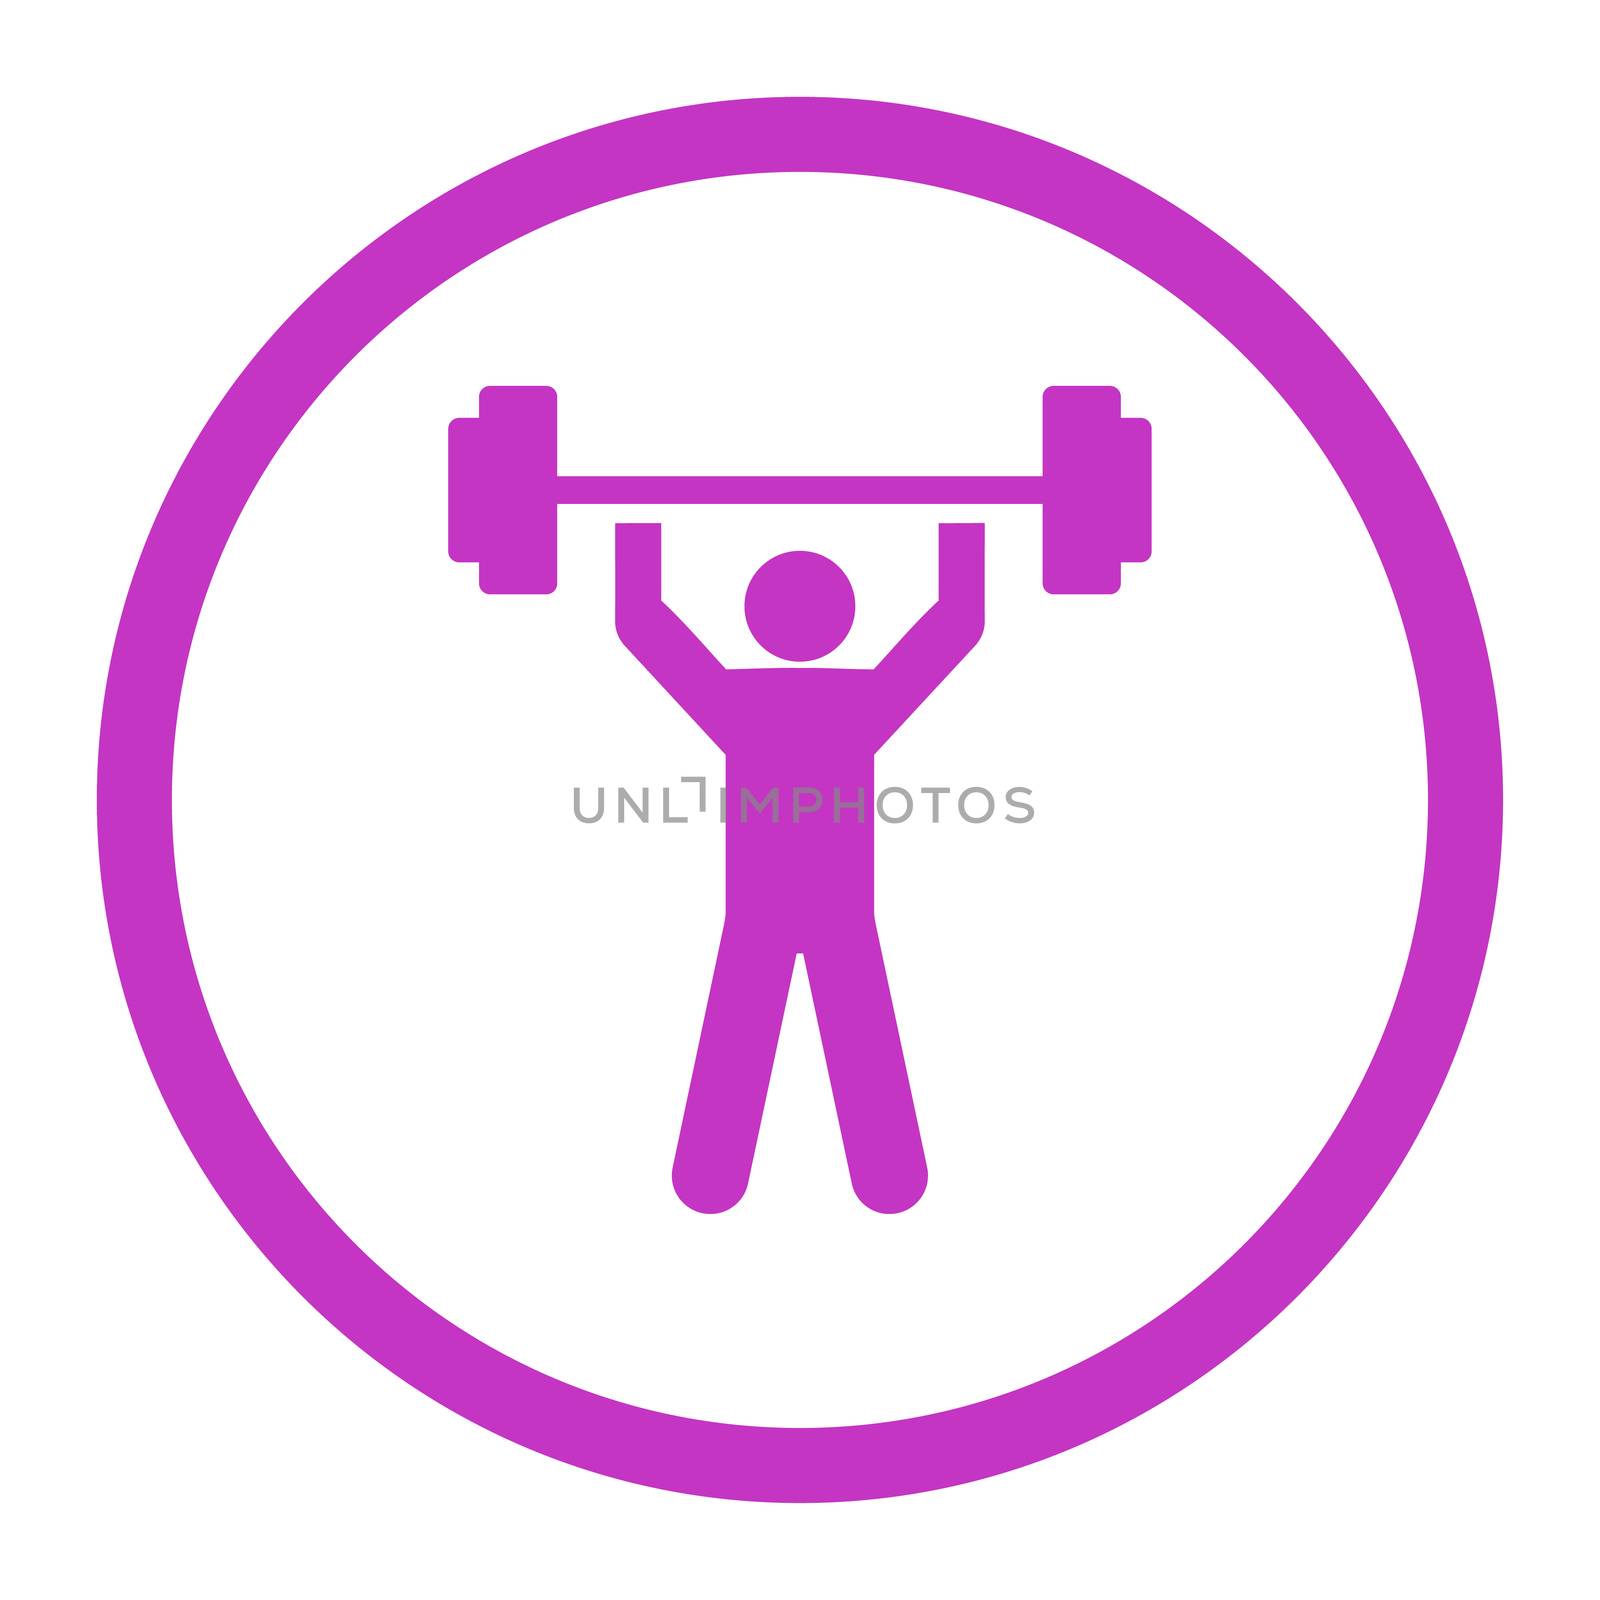 Power lifting glyph icon. This rounded flat symbol is drawn with violet color on a white background.